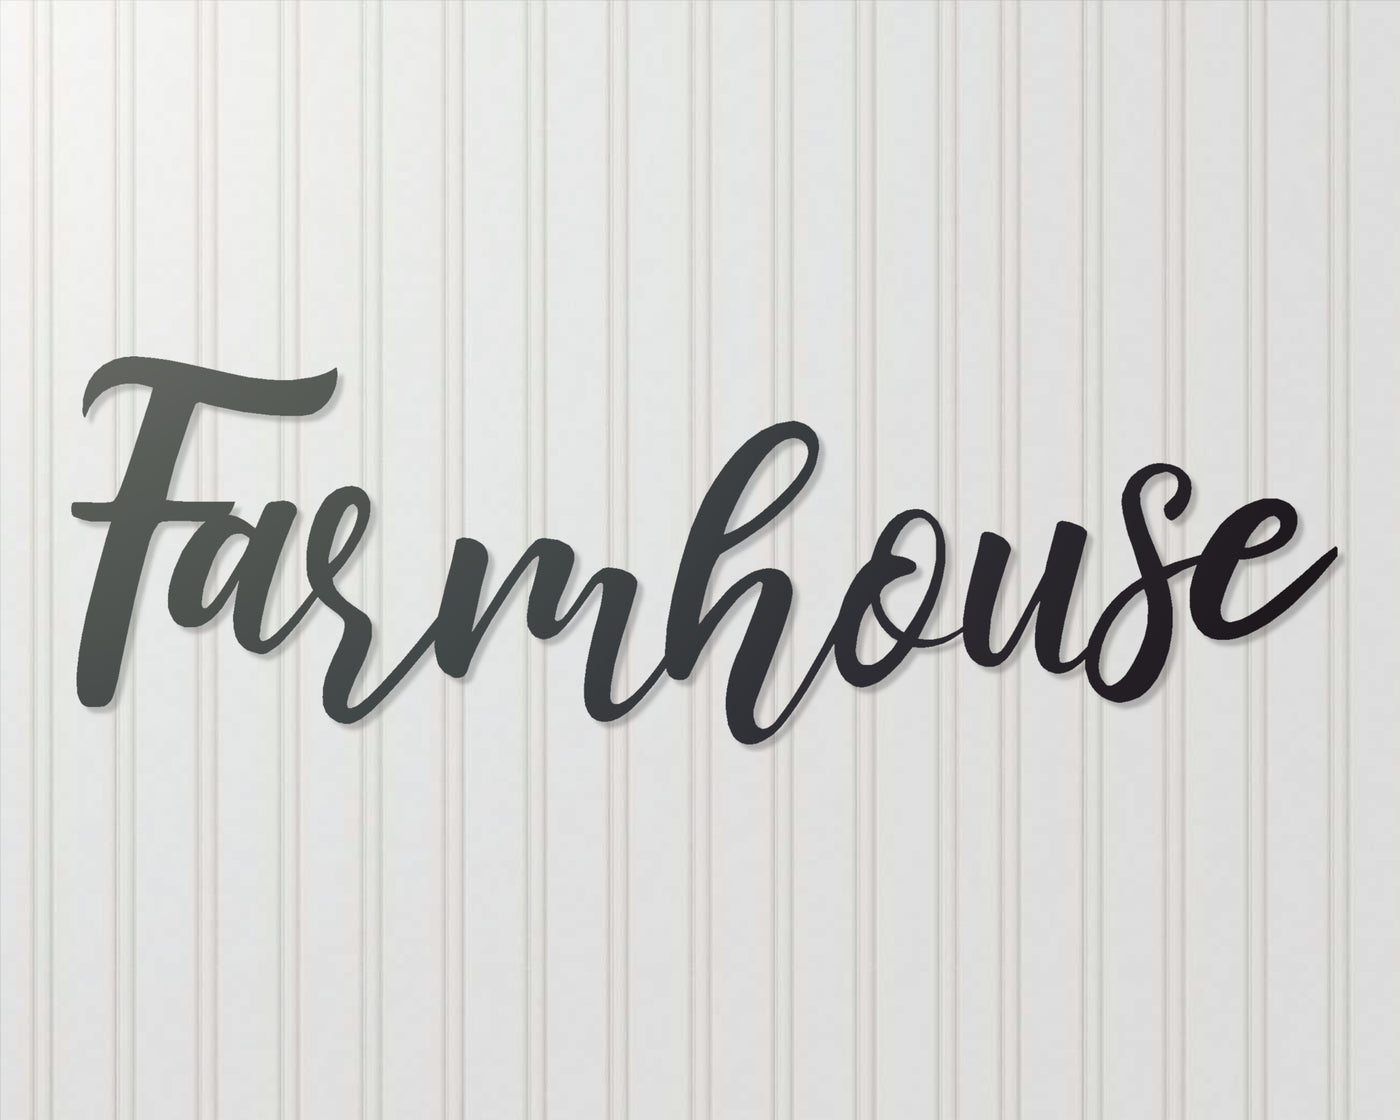 Farmhouse Metal Word Sign - Madison Iron and Wood - Wall Art - metal outdoor decor - Steel deocrations - american made products - veteran owned business products - fencing decorations - fencing supplies - custom wall decorations - personalized wall signs - steel - decorative post caps - steel post caps - metal post caps - brackets - structural brackets - home improvement - easter - easter decorations - easter gift - easter yard decor